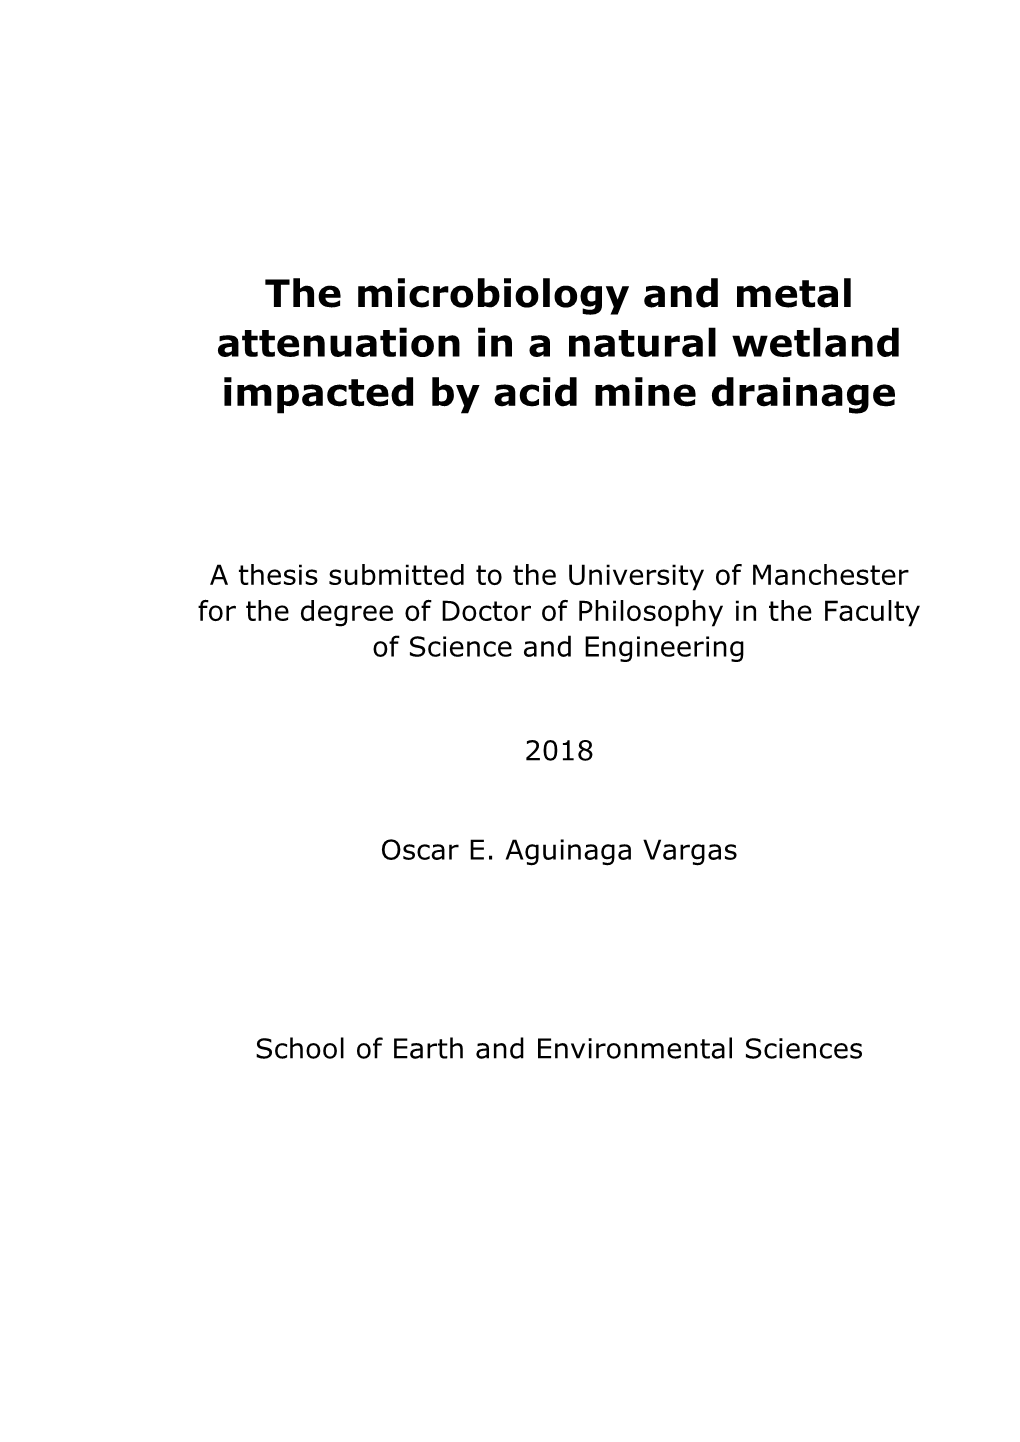 The Microbiology and Metal Attenuation in a Natural Wetland Impacted by Acid Mine Drainage